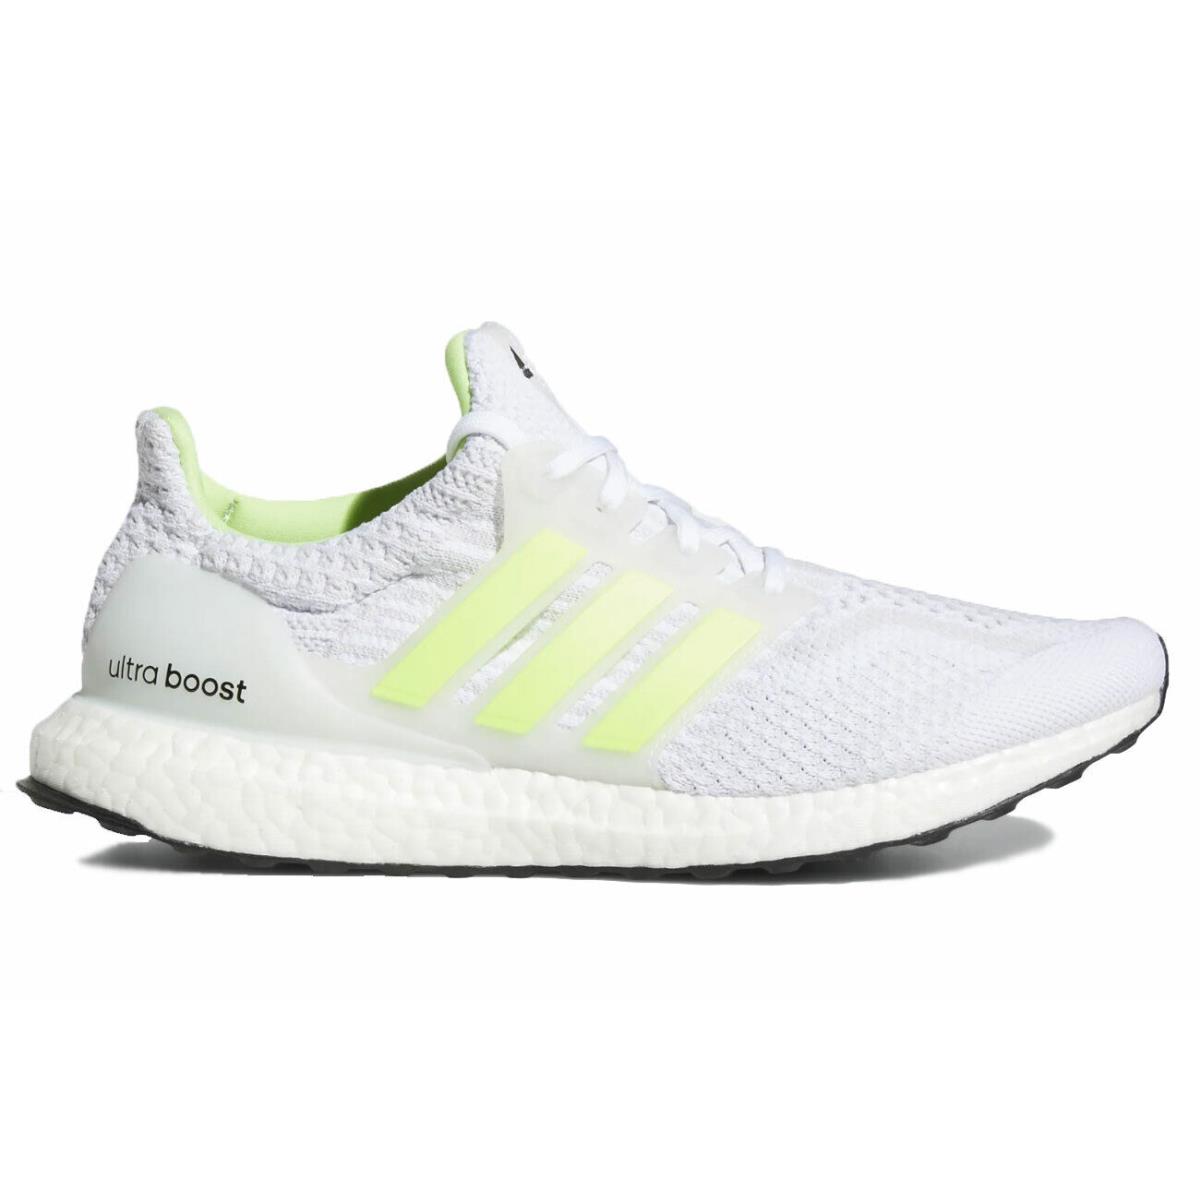 Adidas G58753 Ultraboost 5.0 Dna Cloud White Men`s Casual Running Sneakers - White